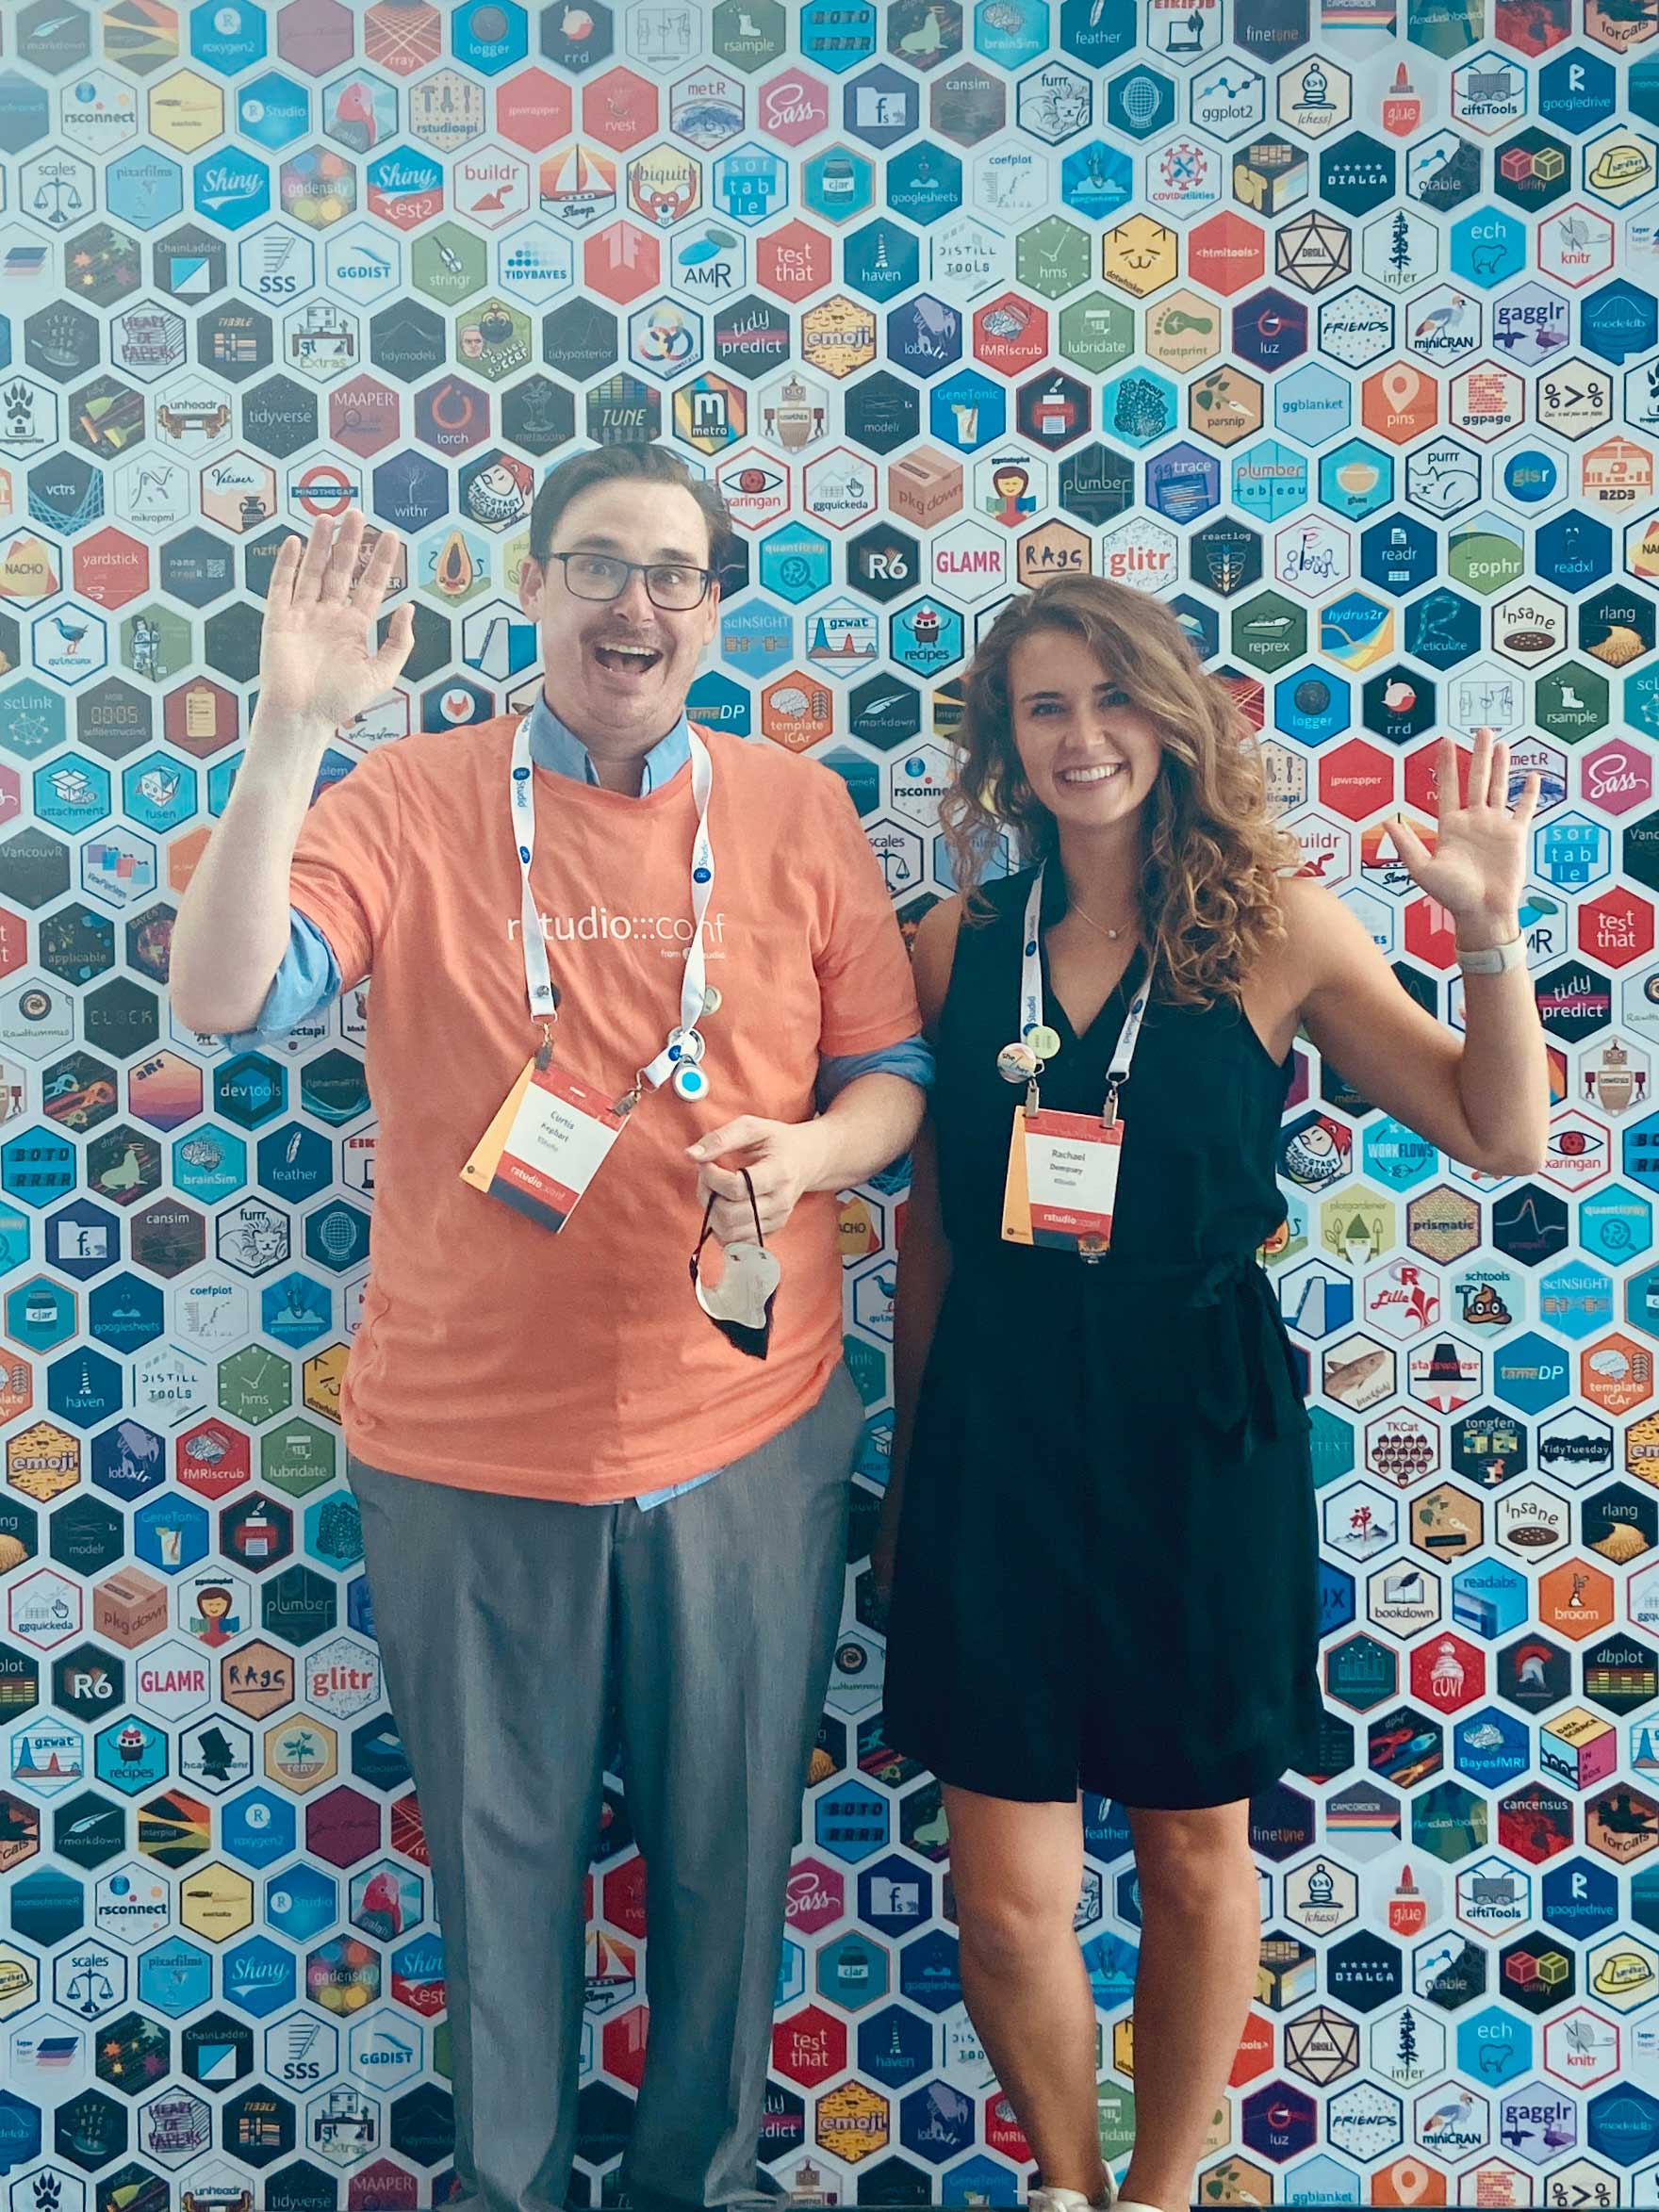 Curtis Kephart and Rachael Dempsey waving in front of hex packages wall